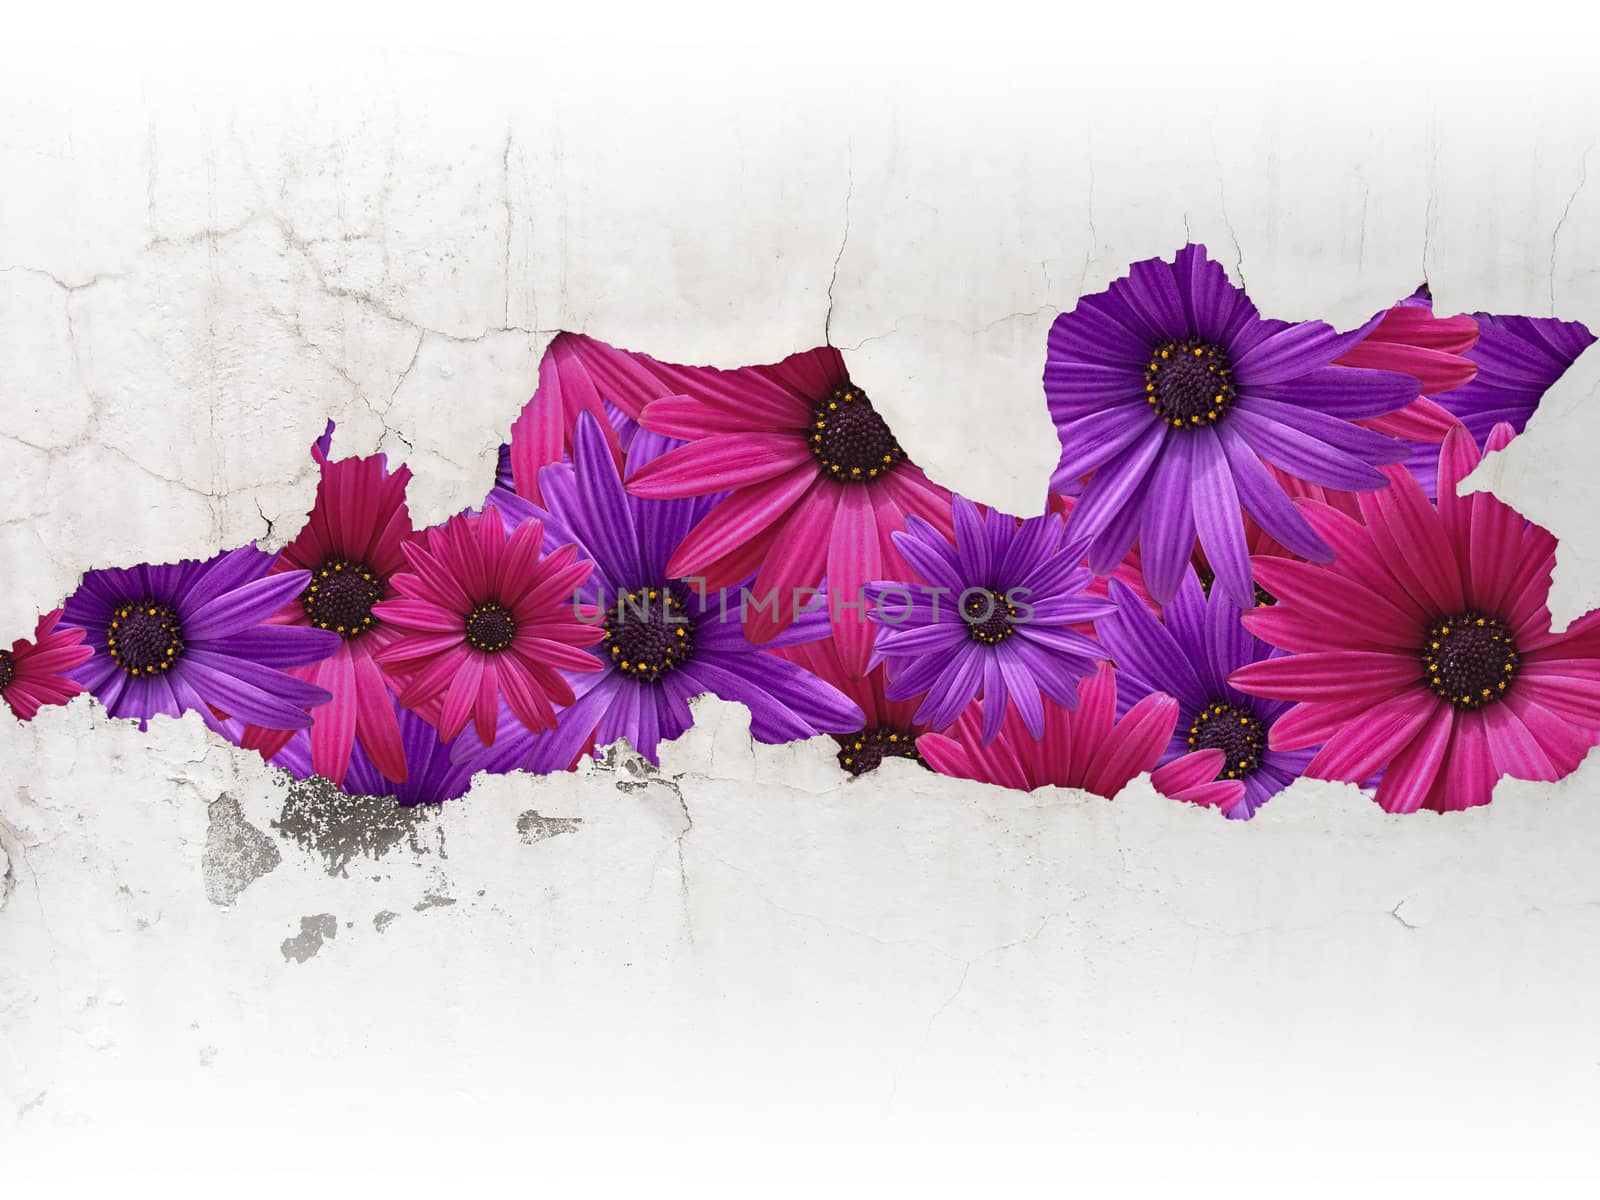 flowers behind the cracked dirty wall by fotoecho